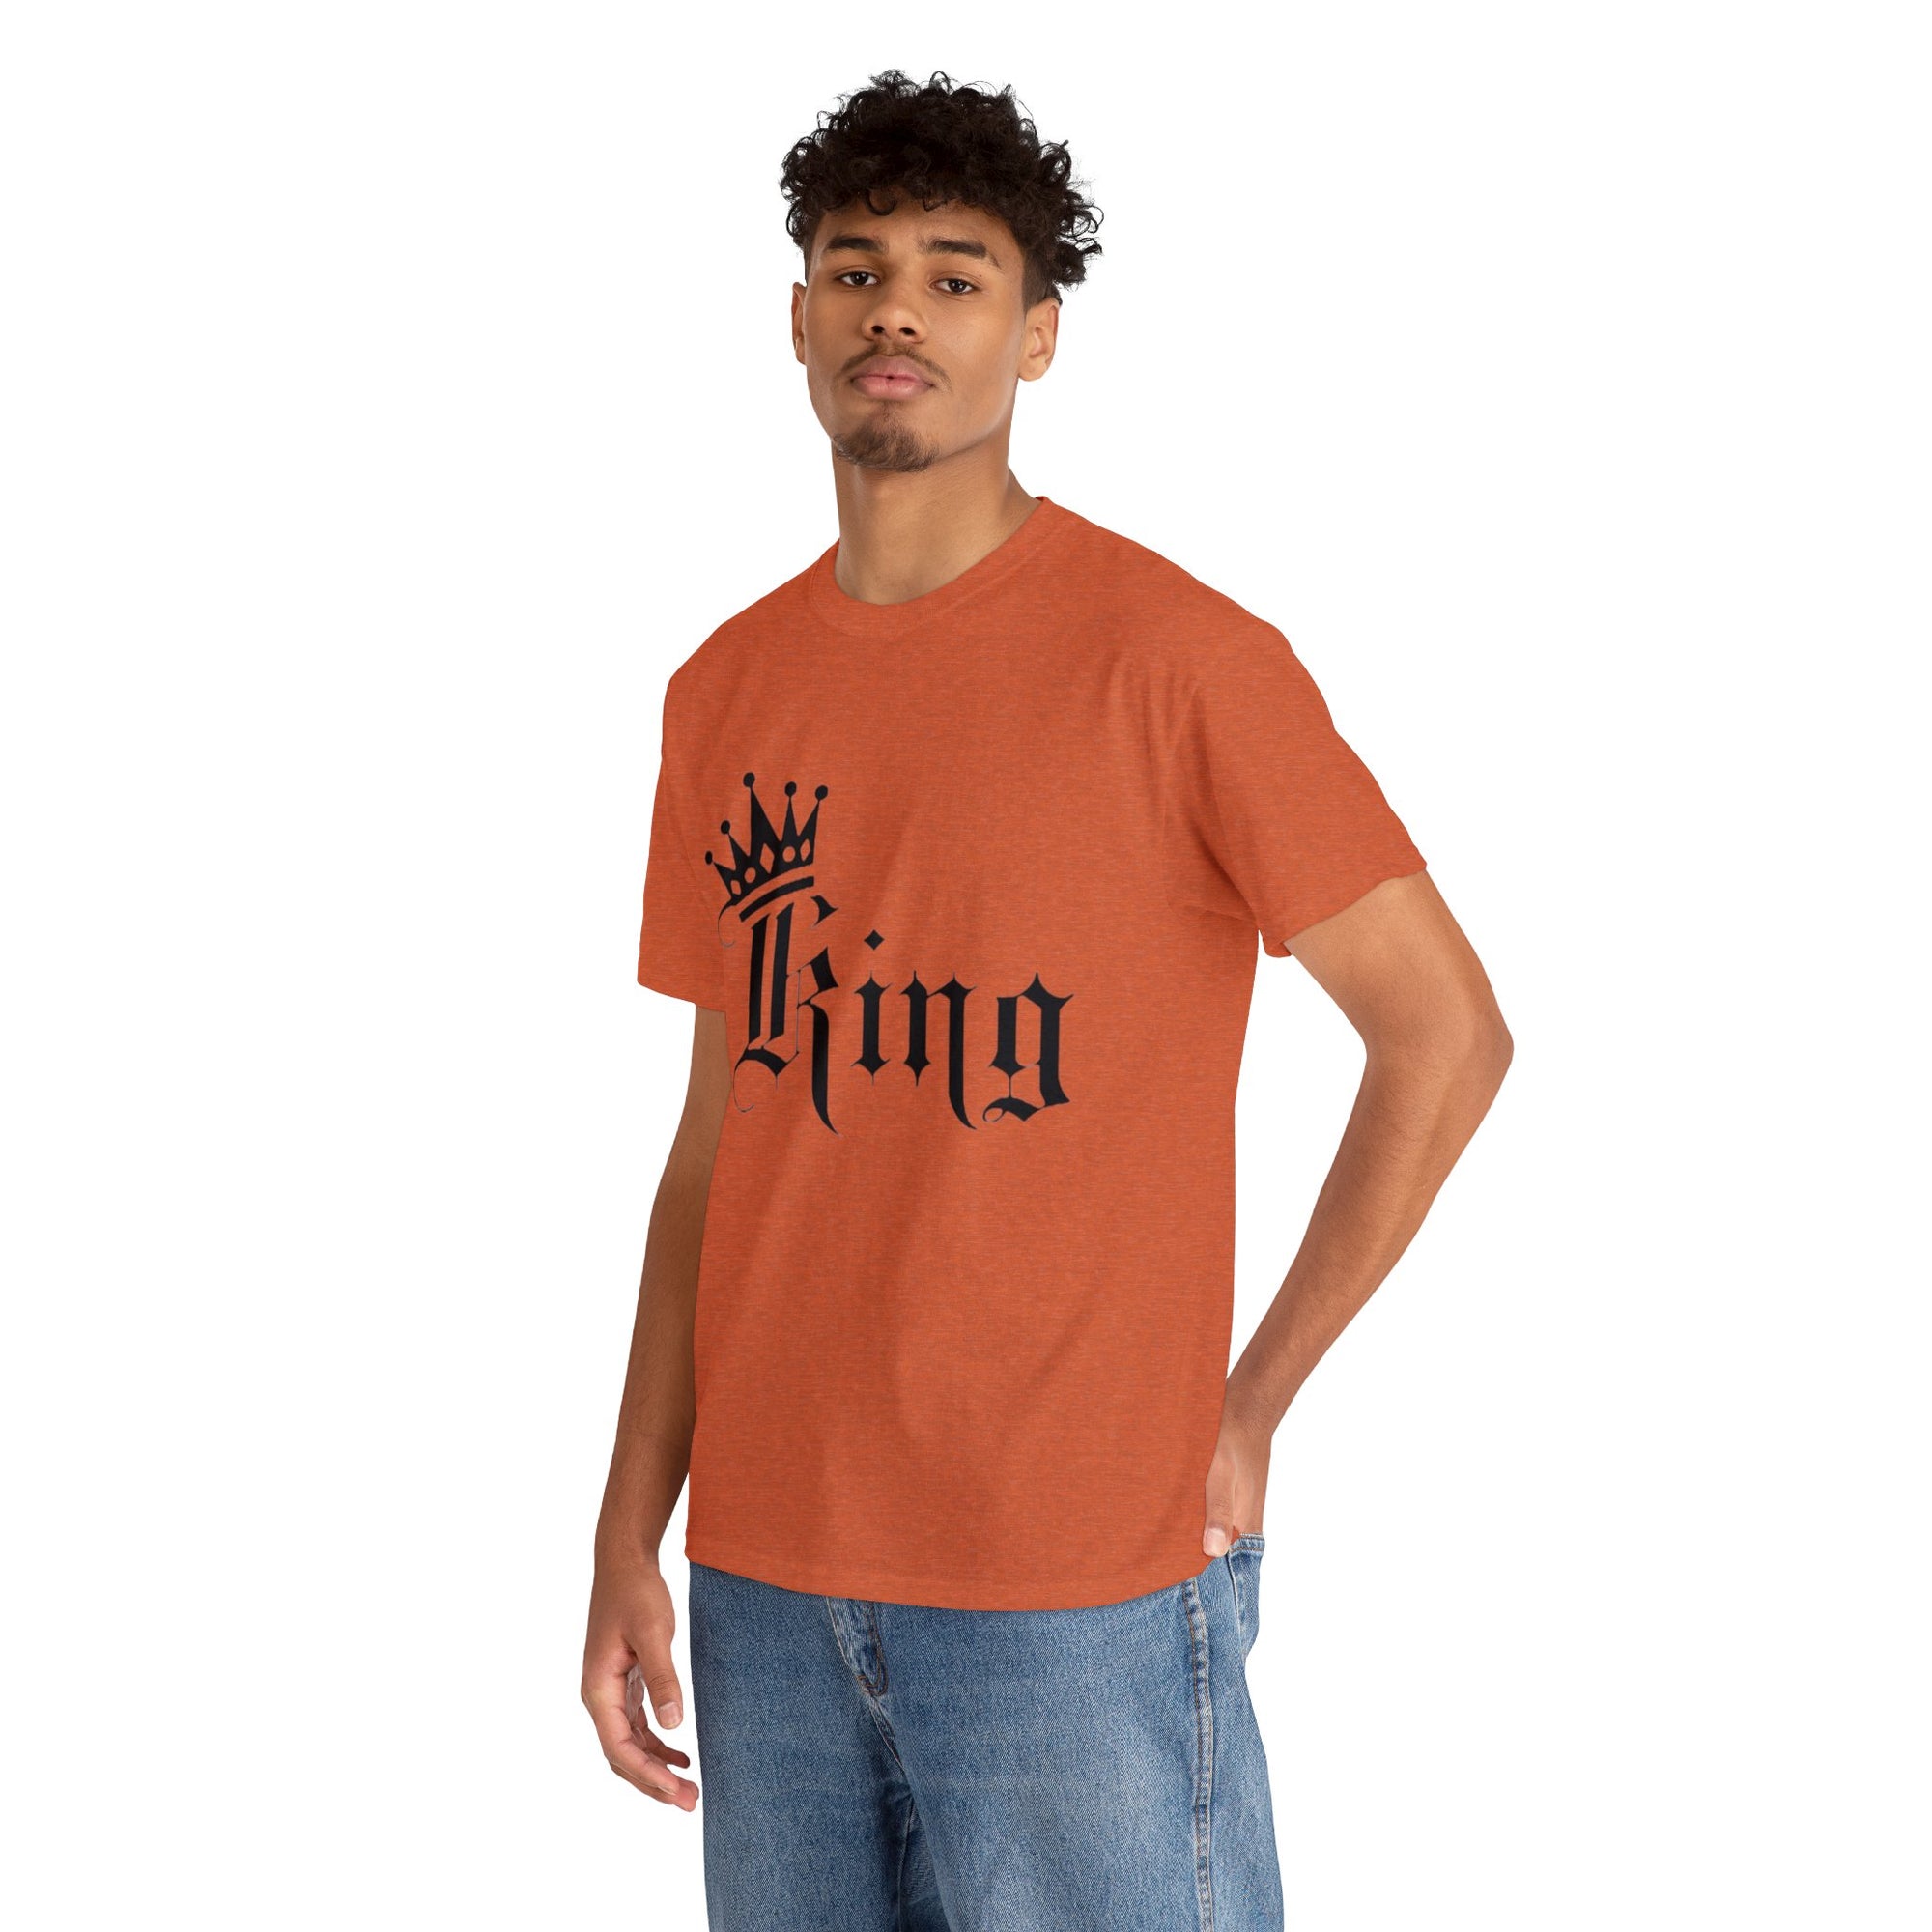 Graphic designed "King" T-Shirt